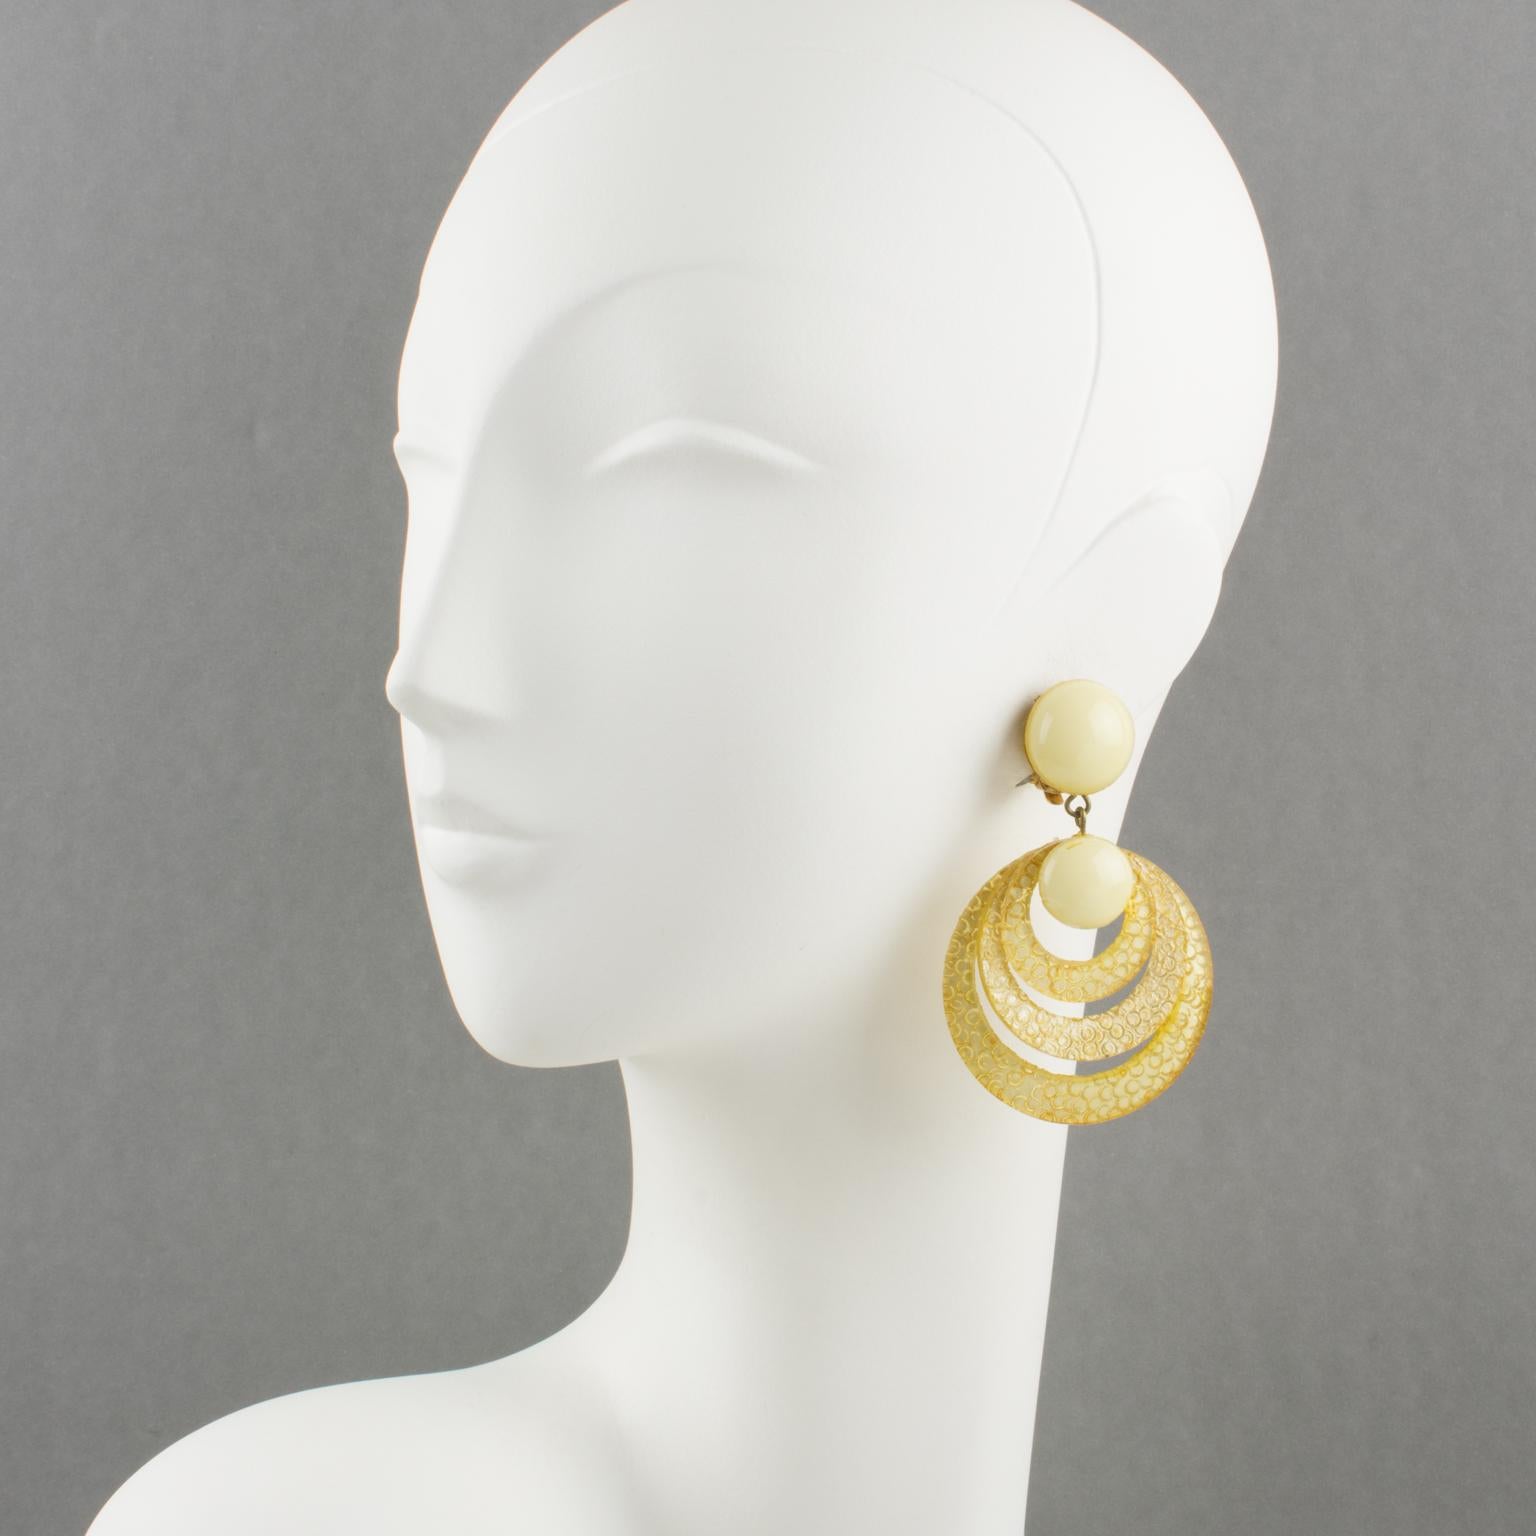 Adorable clip-on earrings, designed and manufactured by Cilea Paris for Francoise Montague. Oversized dangle shape, in light yellow resin featuring graduated rings. The assorted carved and textured patterns are used differently to increase the